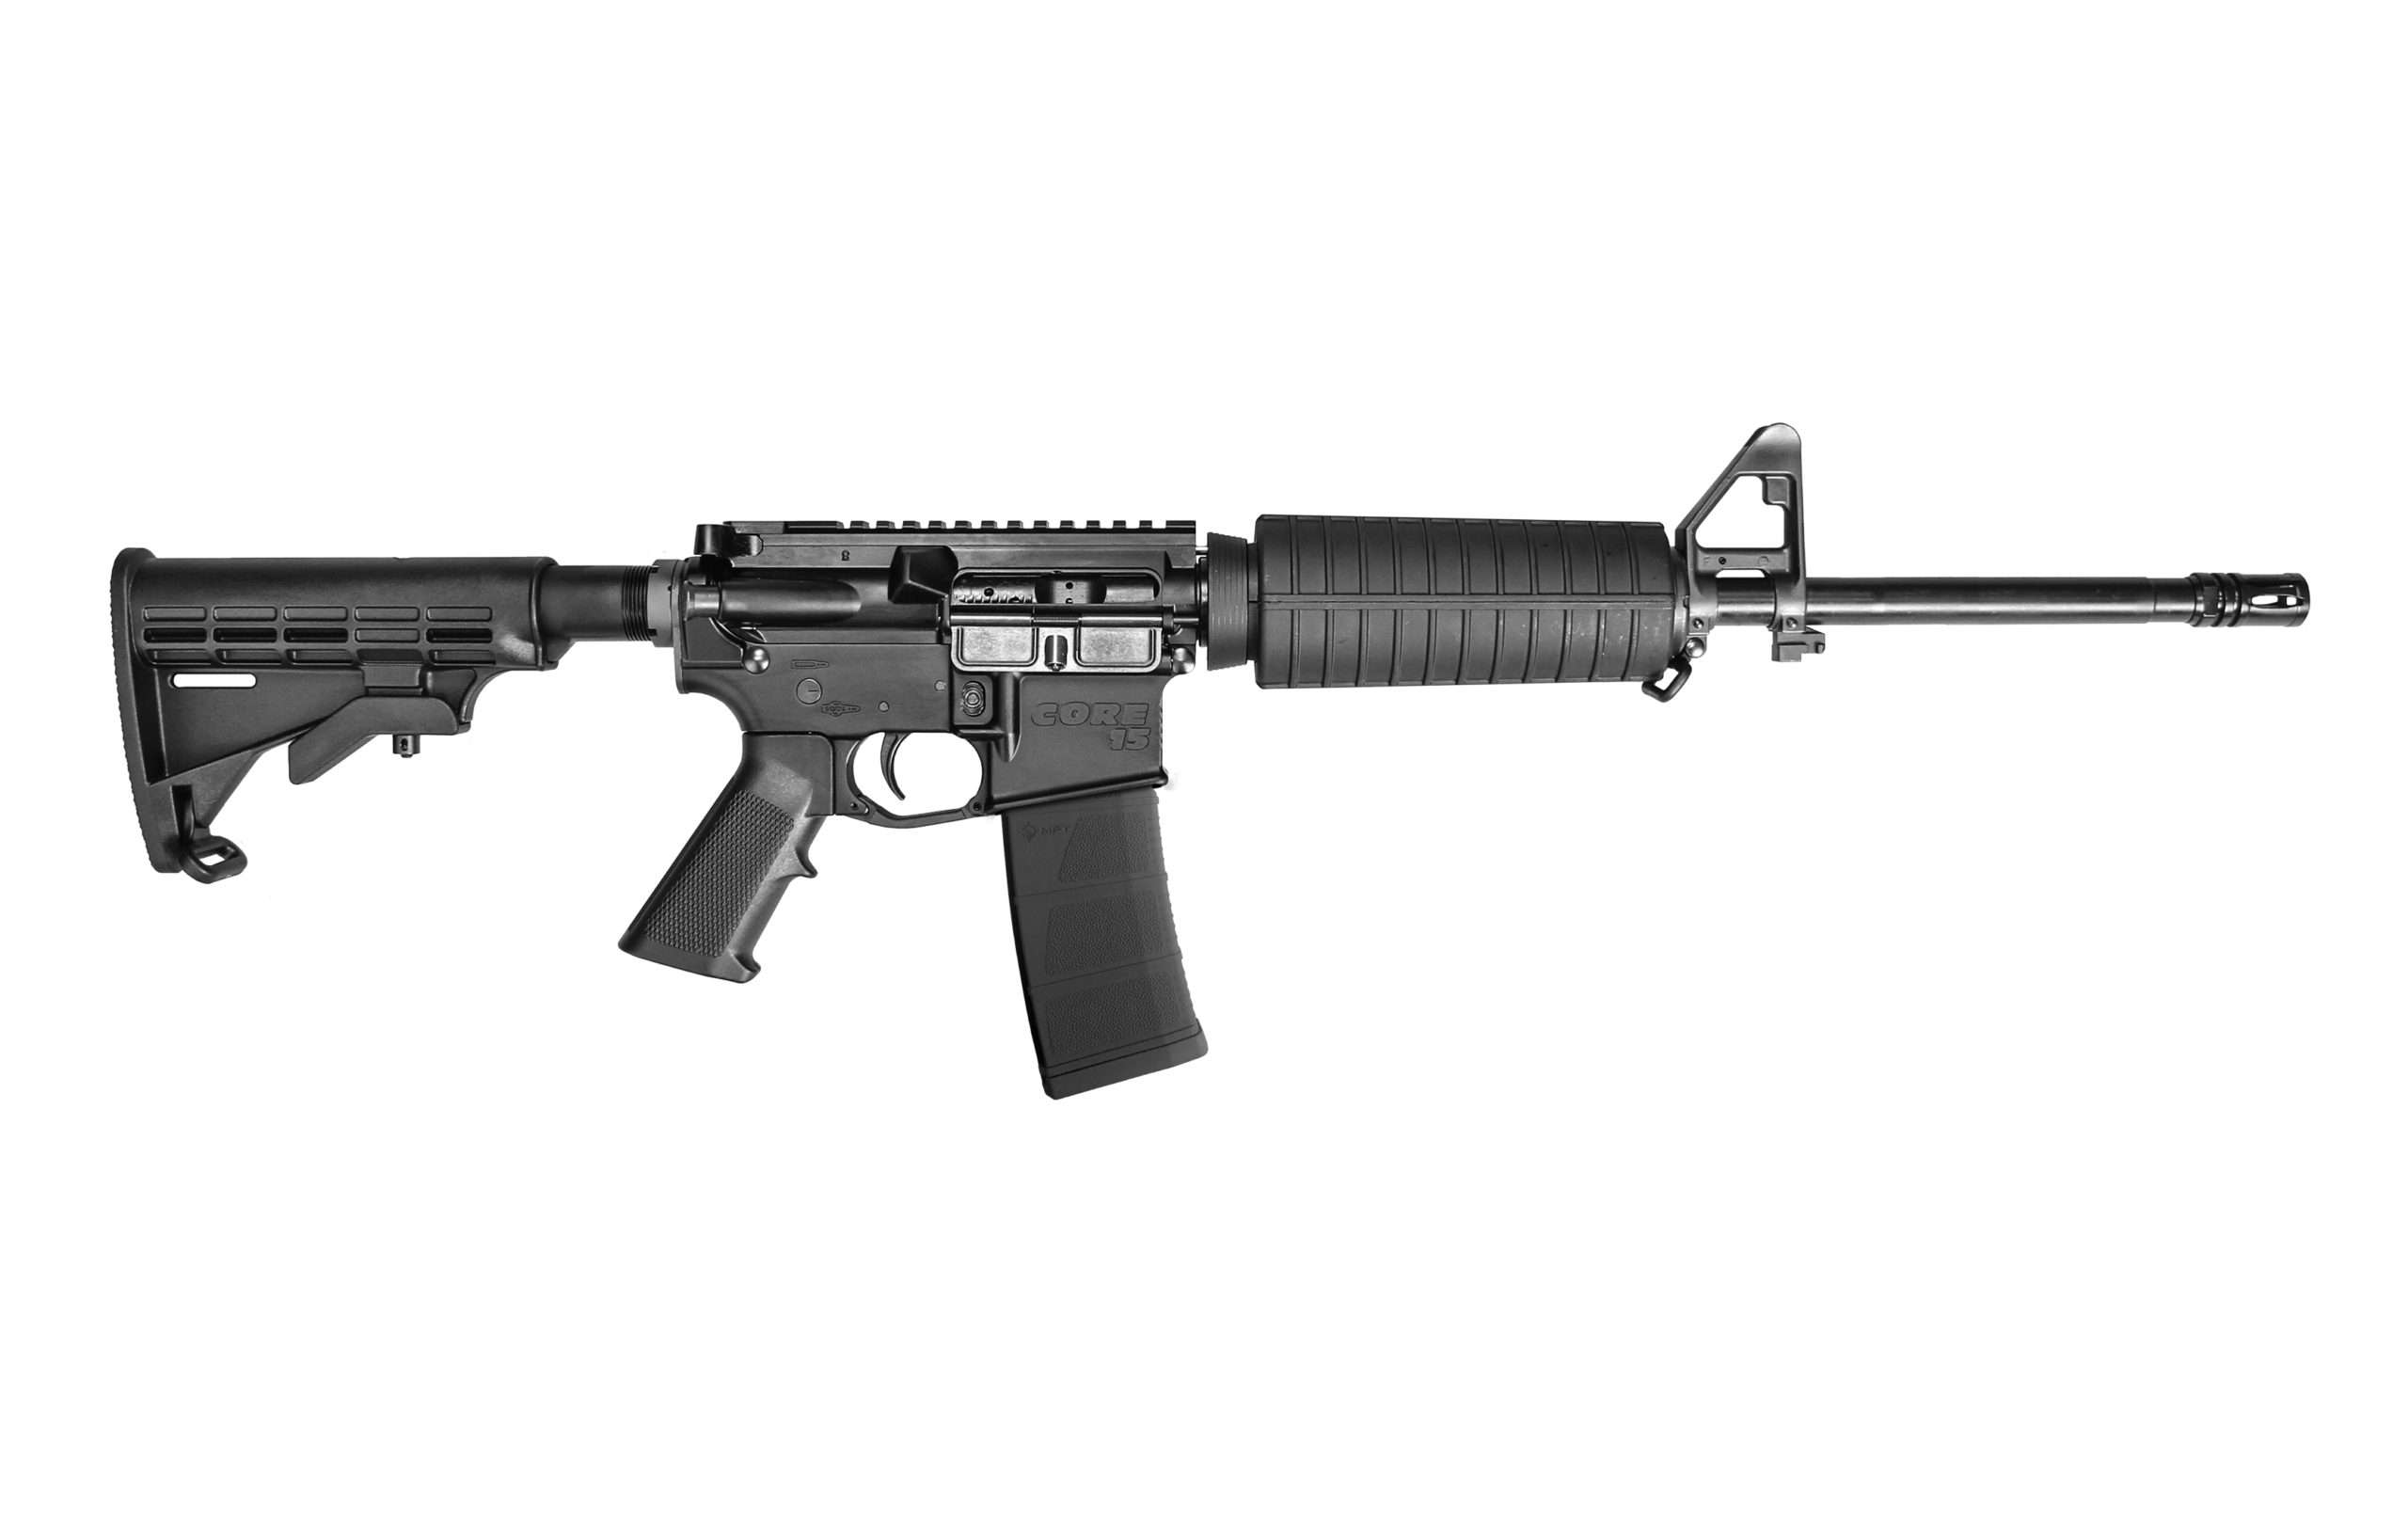 AR-15 Rifle, in stock buy now